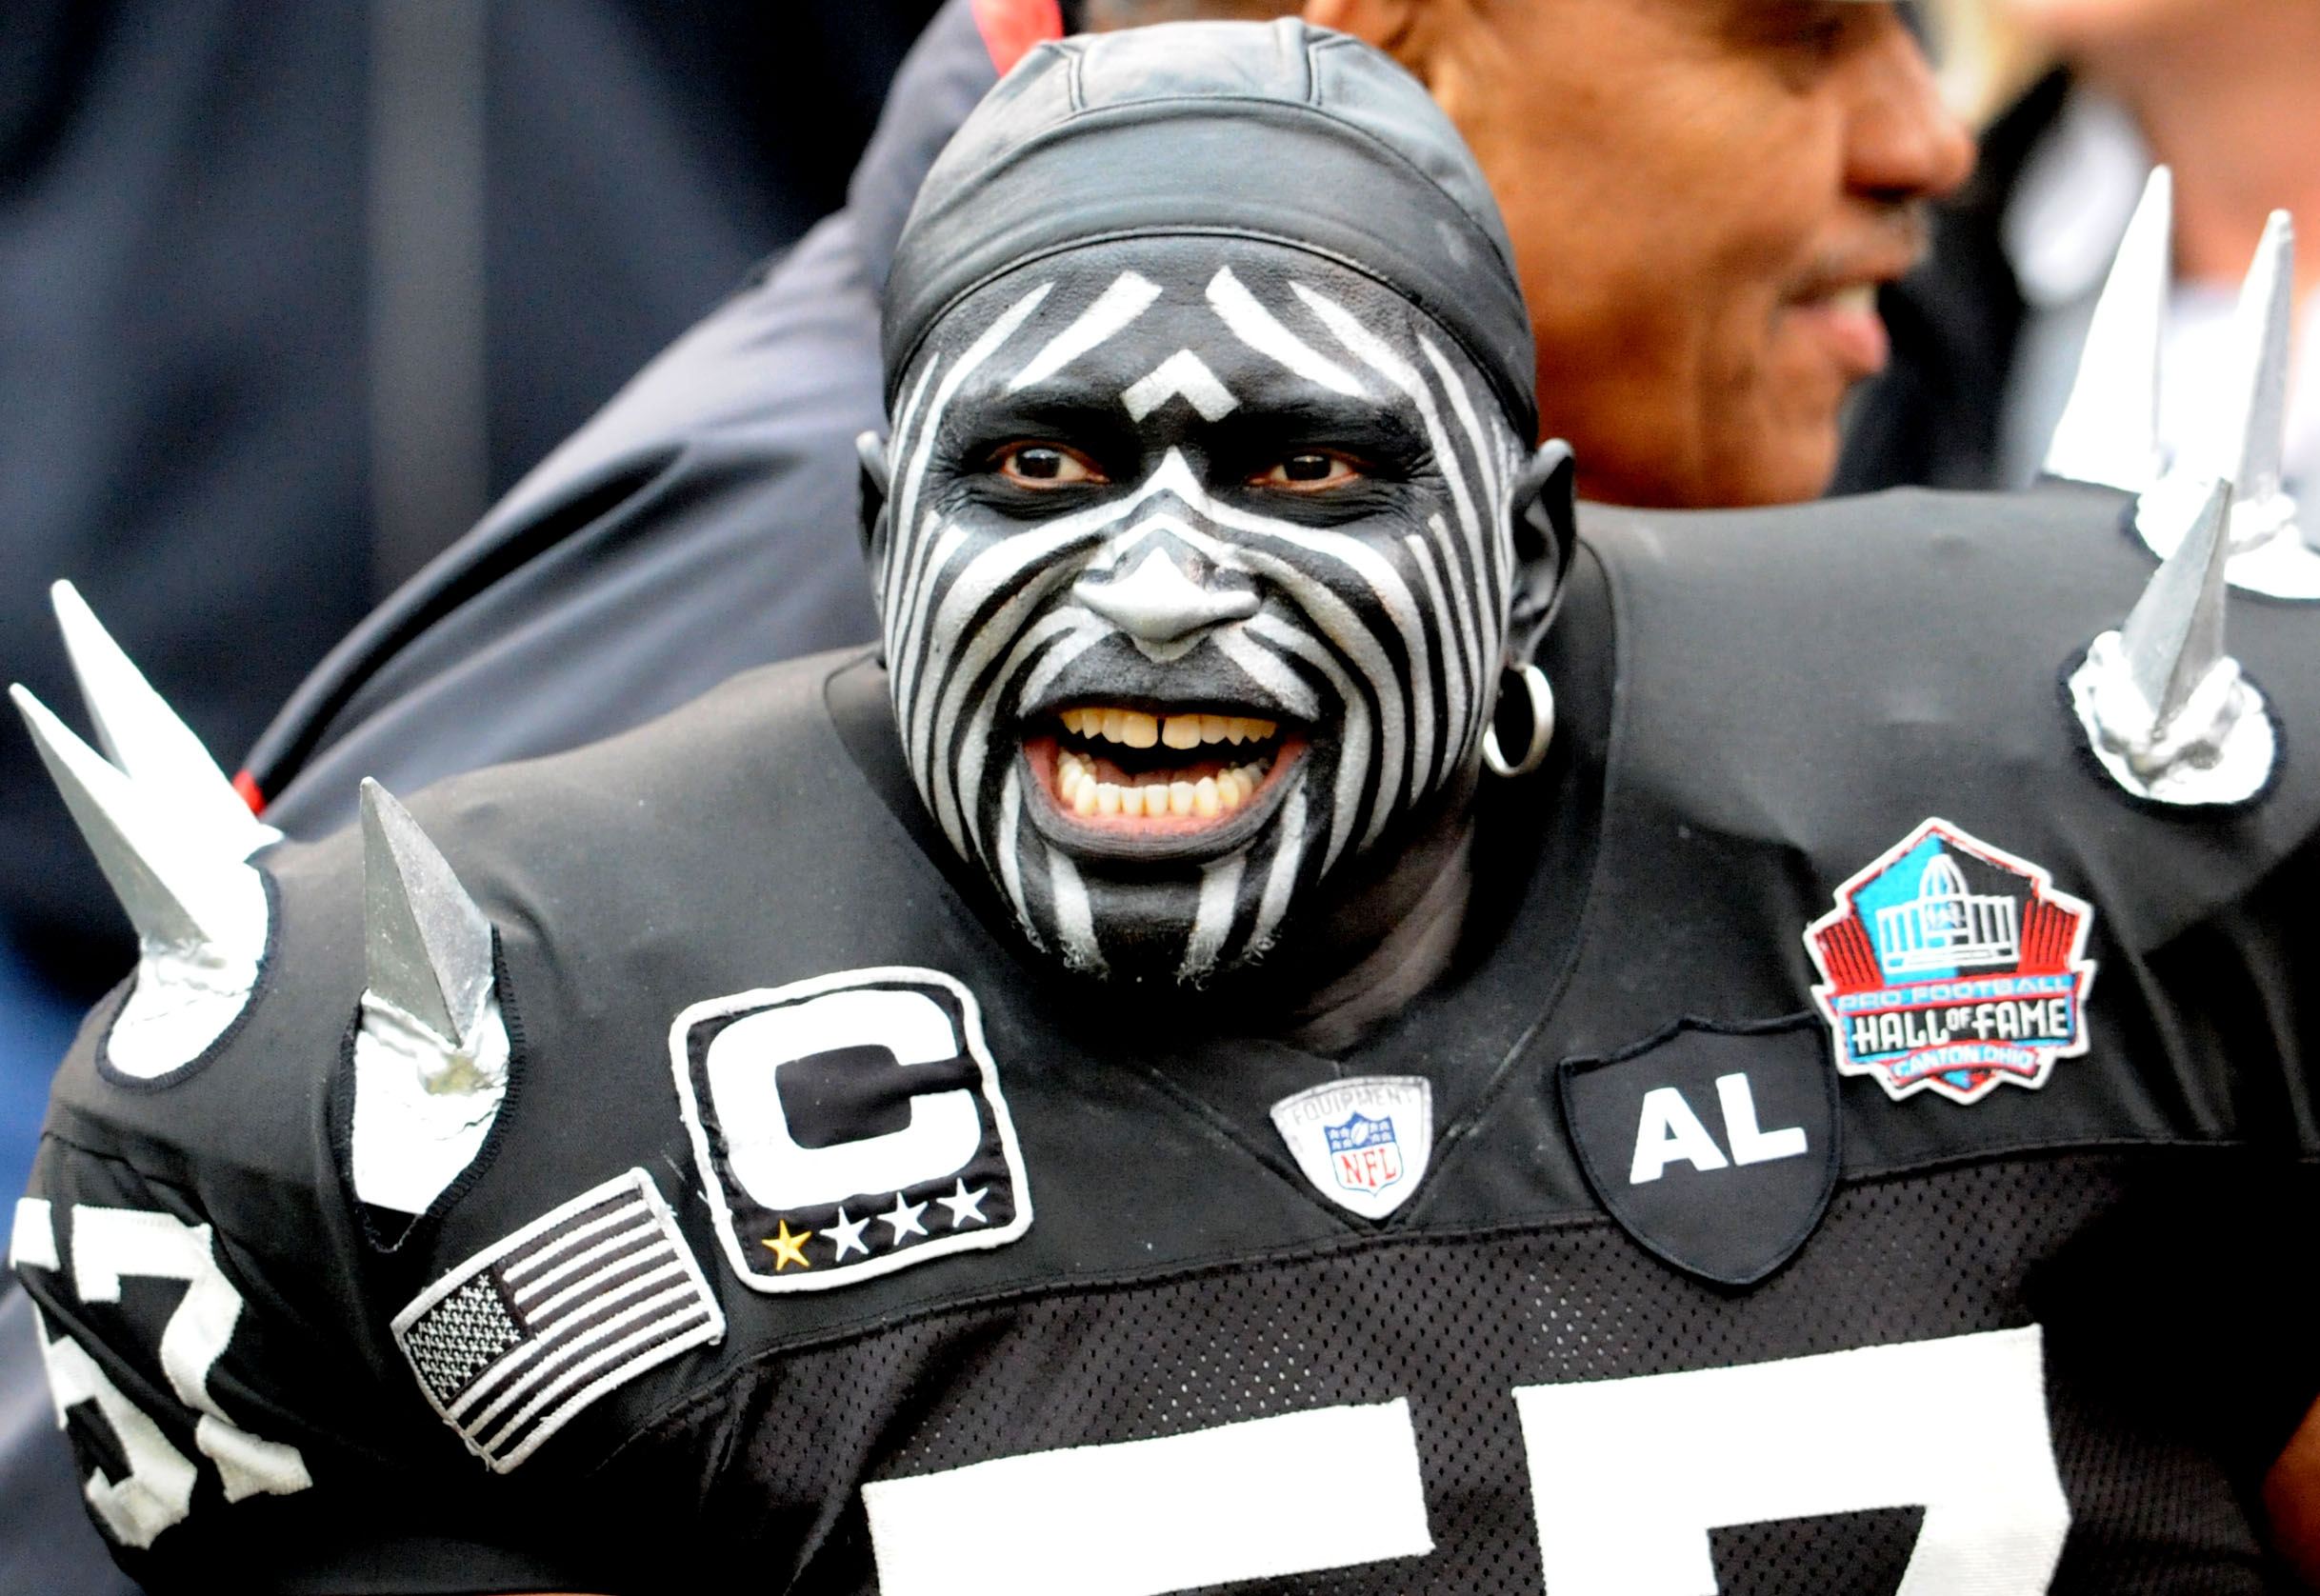 Oakland Raiders fan Wayne Mabry, also known as "The Violator," cheers for his team in 2011.